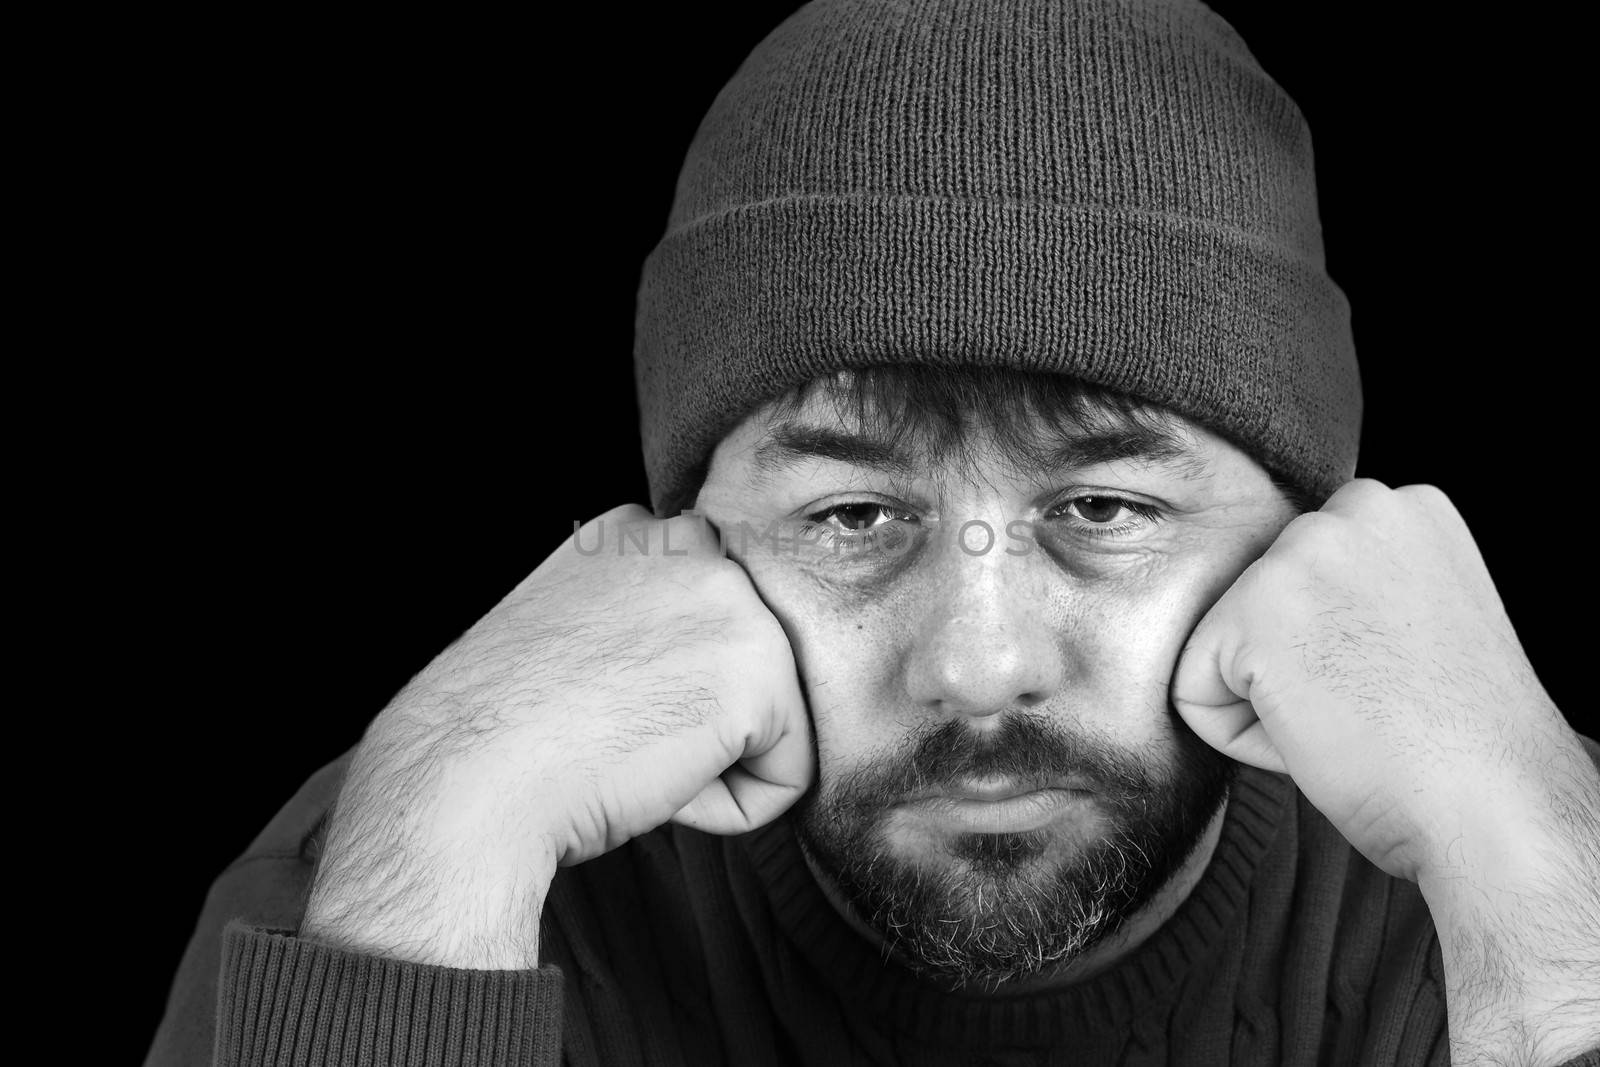 Dramatic black and white portrait of a man in despair